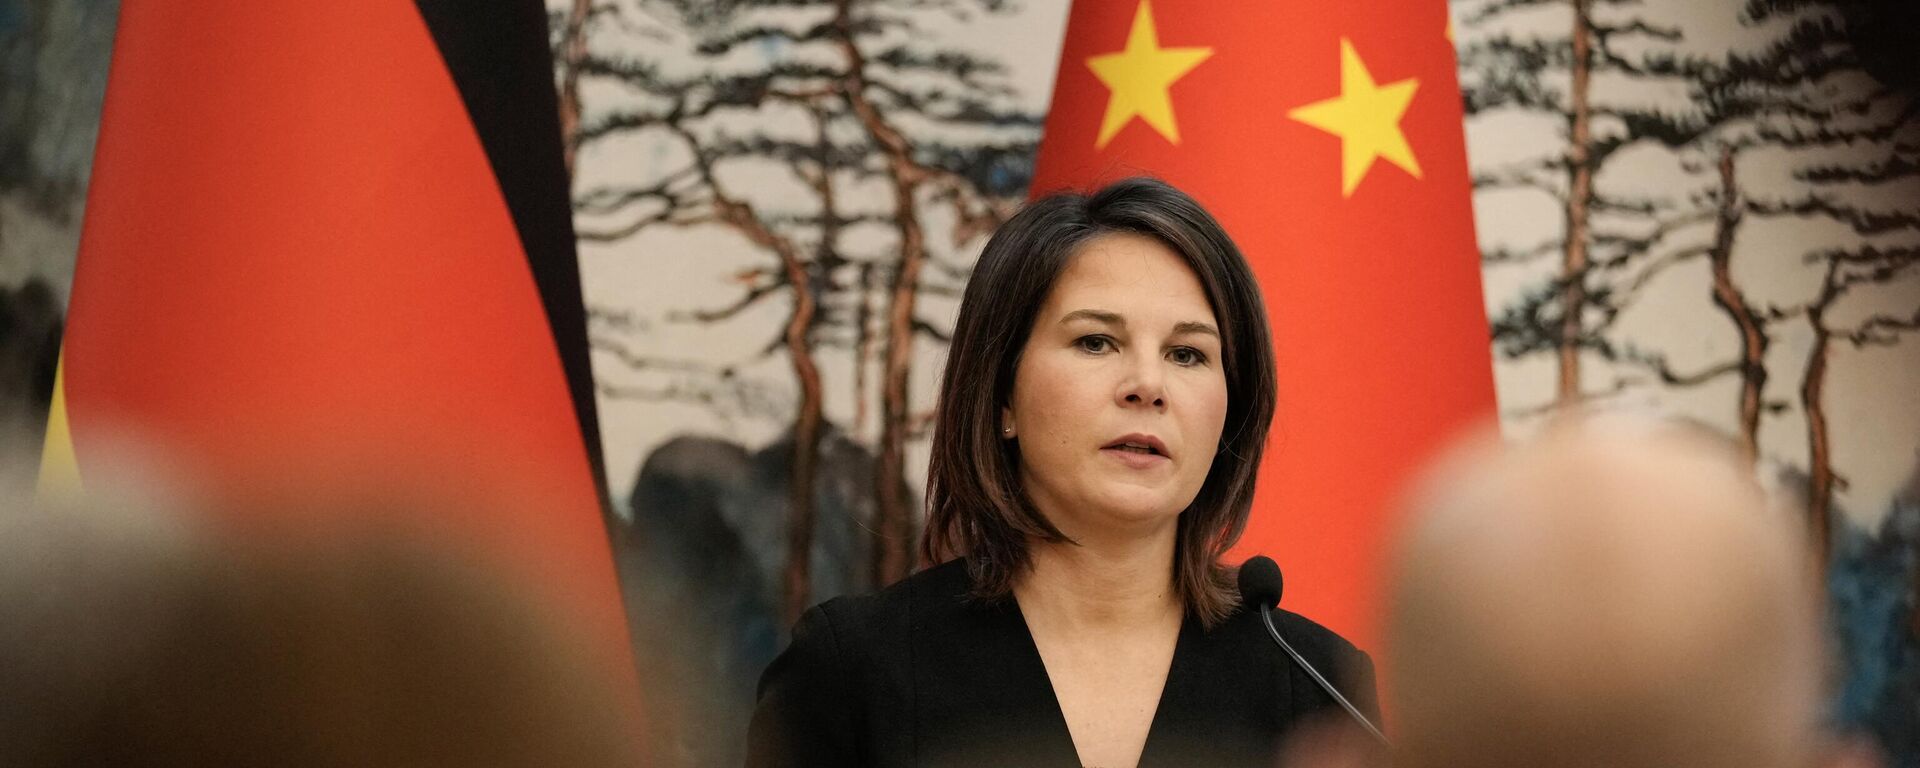 Germany's Foreign Minister Annalena Baerbock attends a joint press conference with Chinese Foreign Minister Qin Gang at the Diaoyutai State Guesthouse in Beijing on April 14, 2023. - Sputnik International, 1920, 15.04.2023